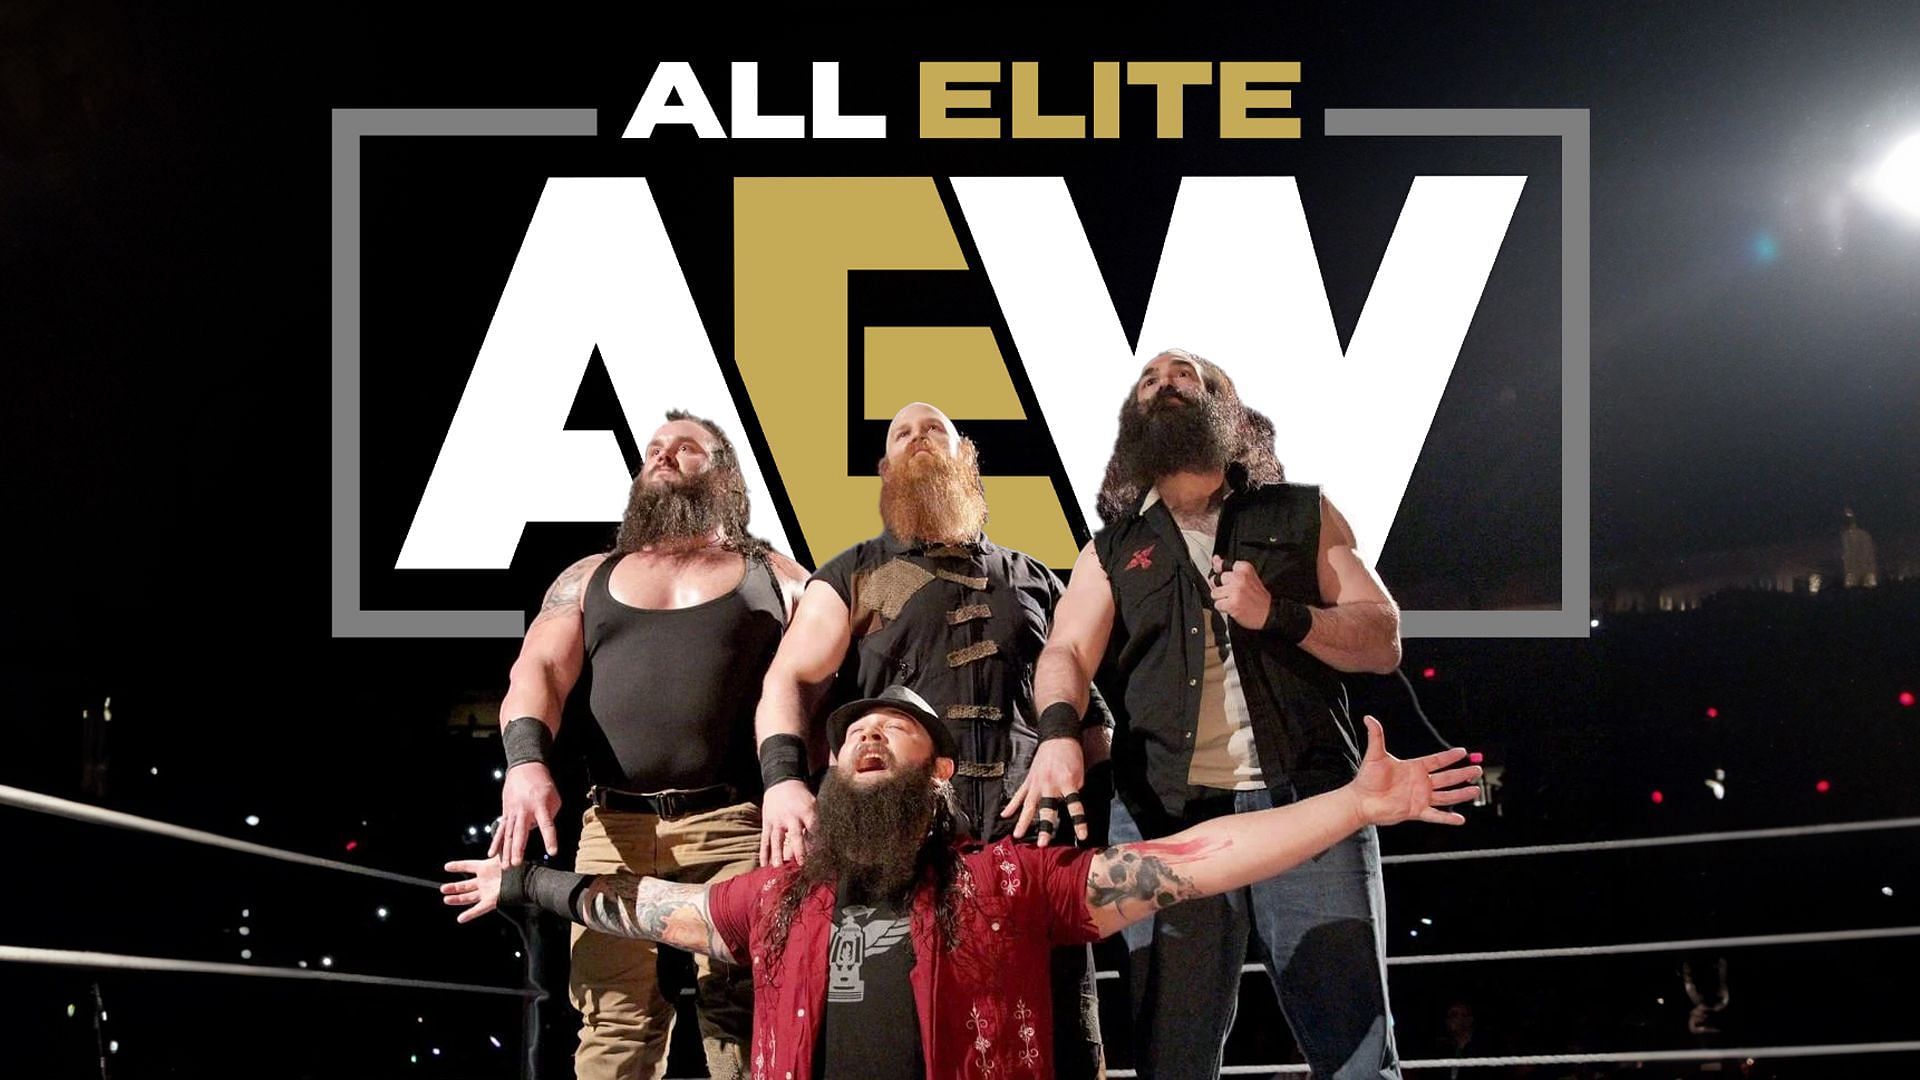 An AEW/ROH faction might be compared to Bray Wyatt